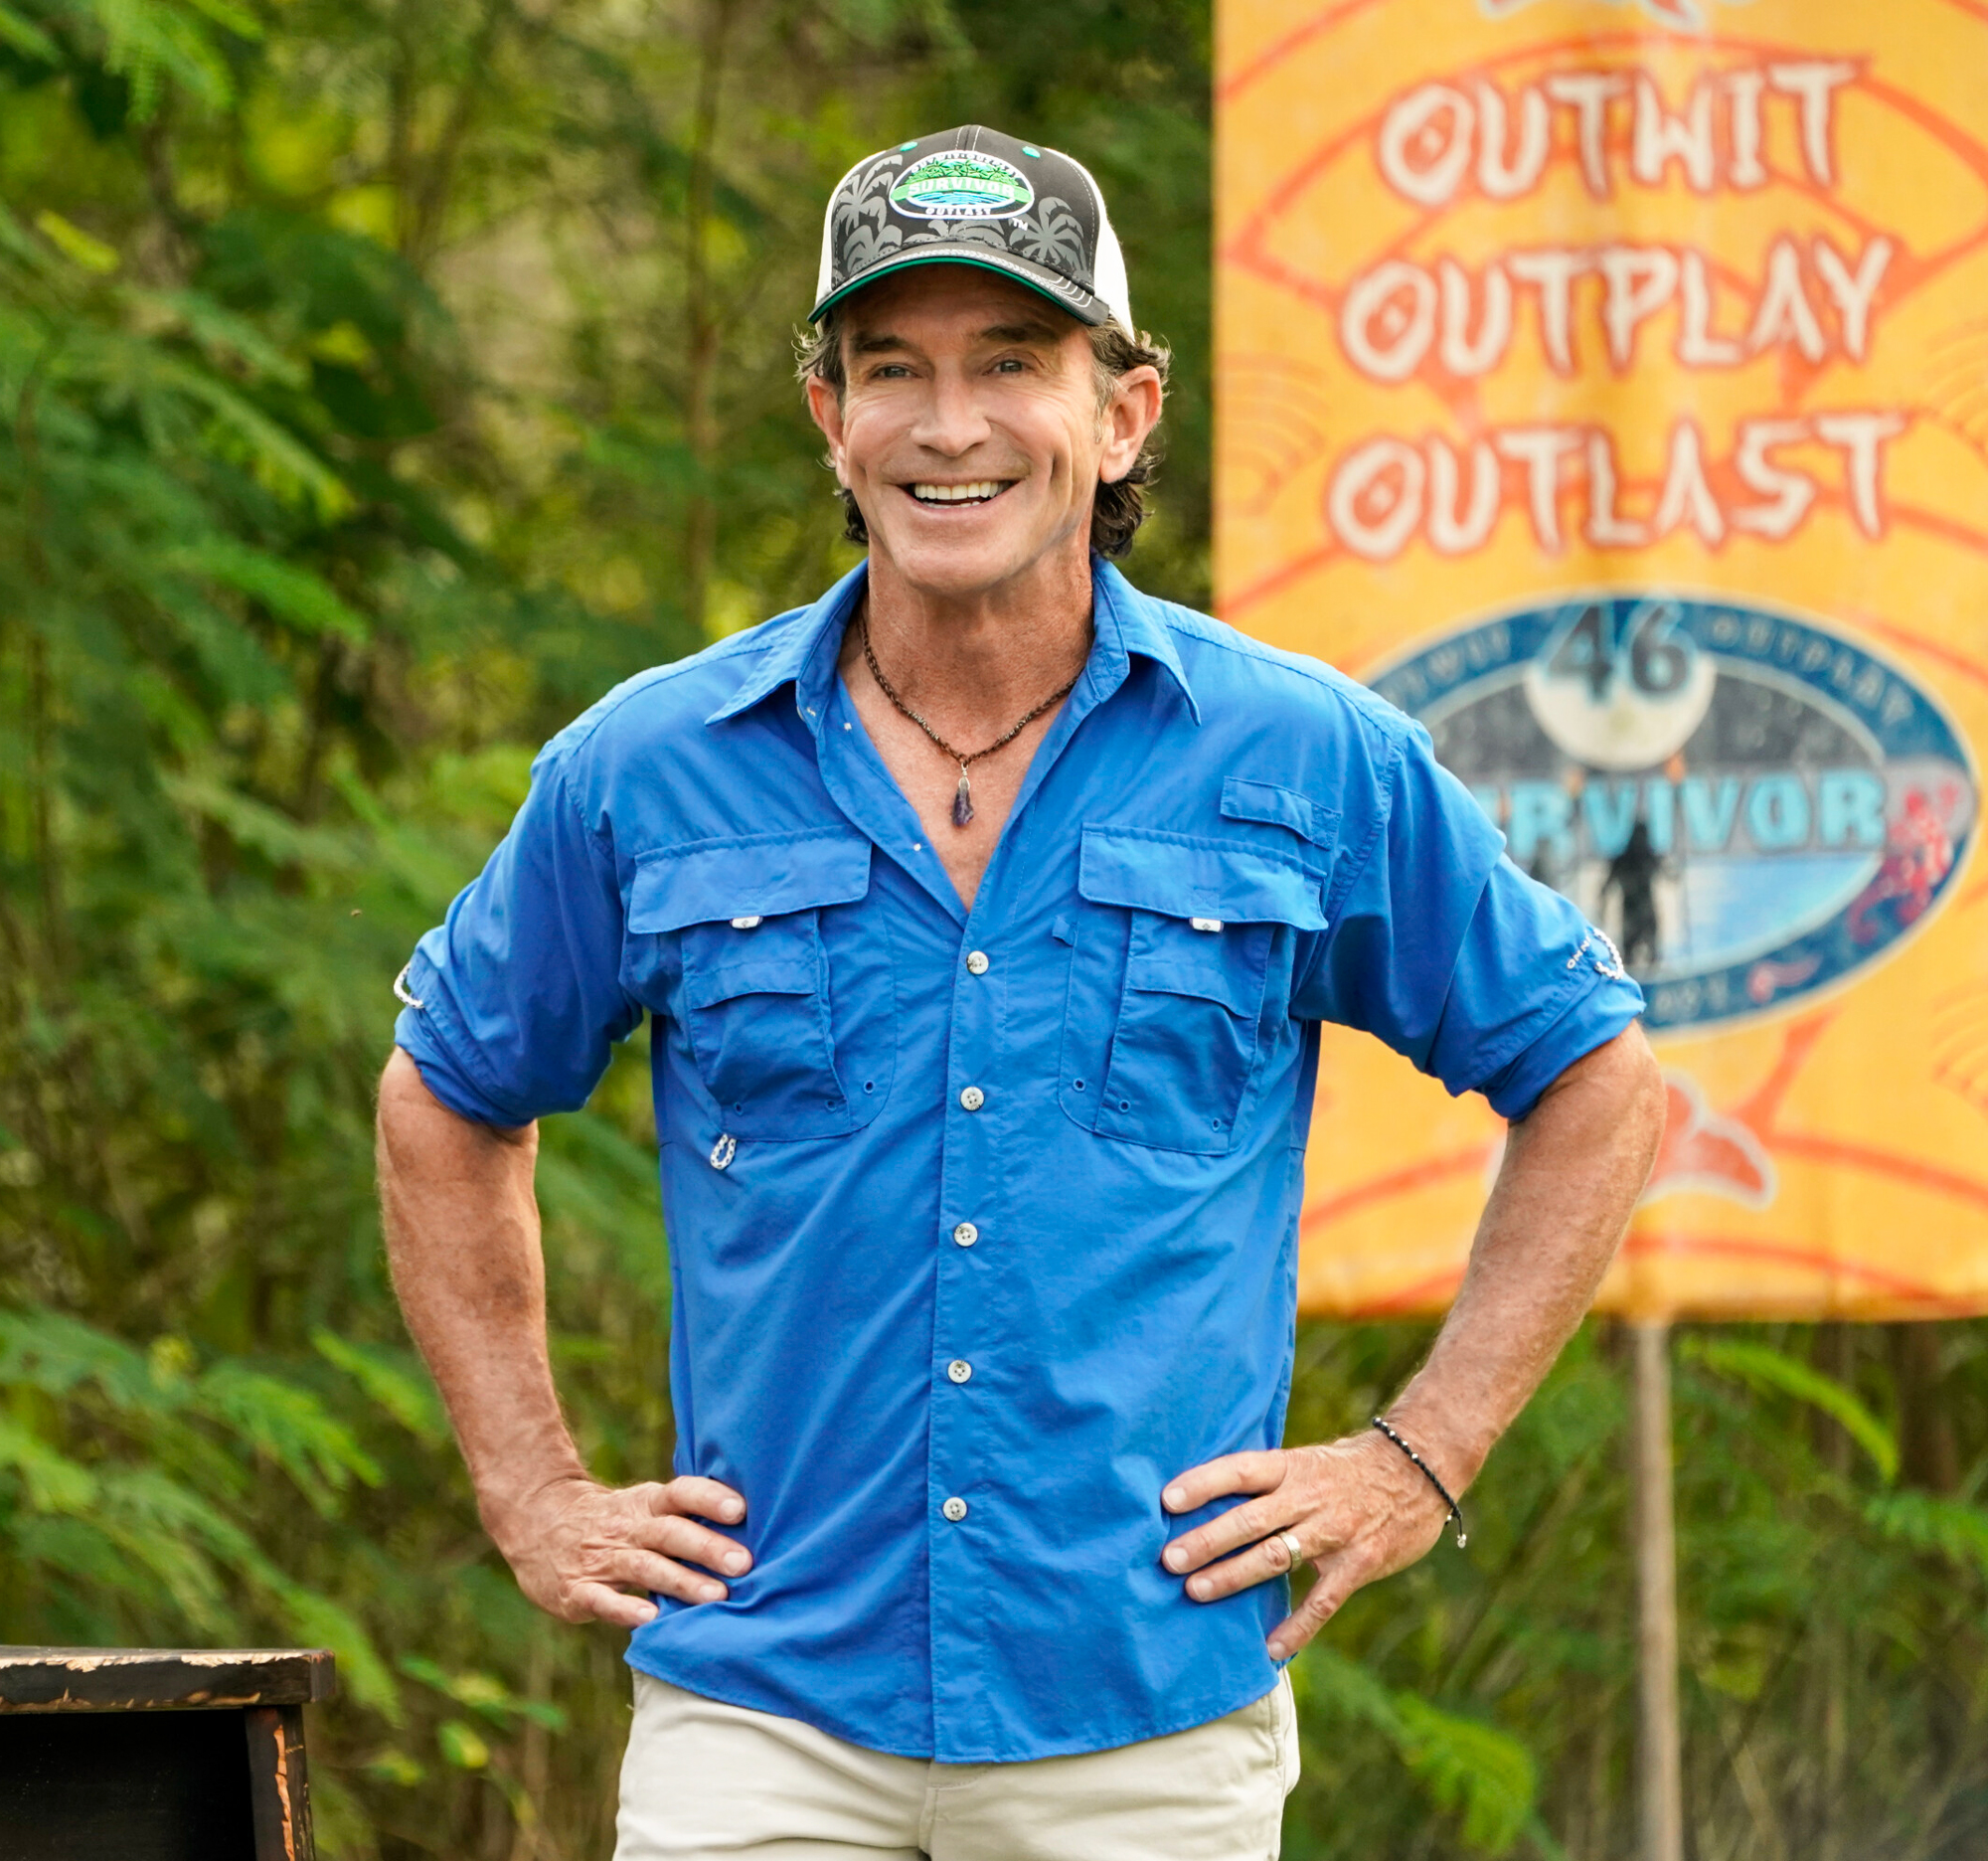 Host Jeff Probst Is ‘Absolutely Not’ Changing the Flint Rule on ‘Survivor’